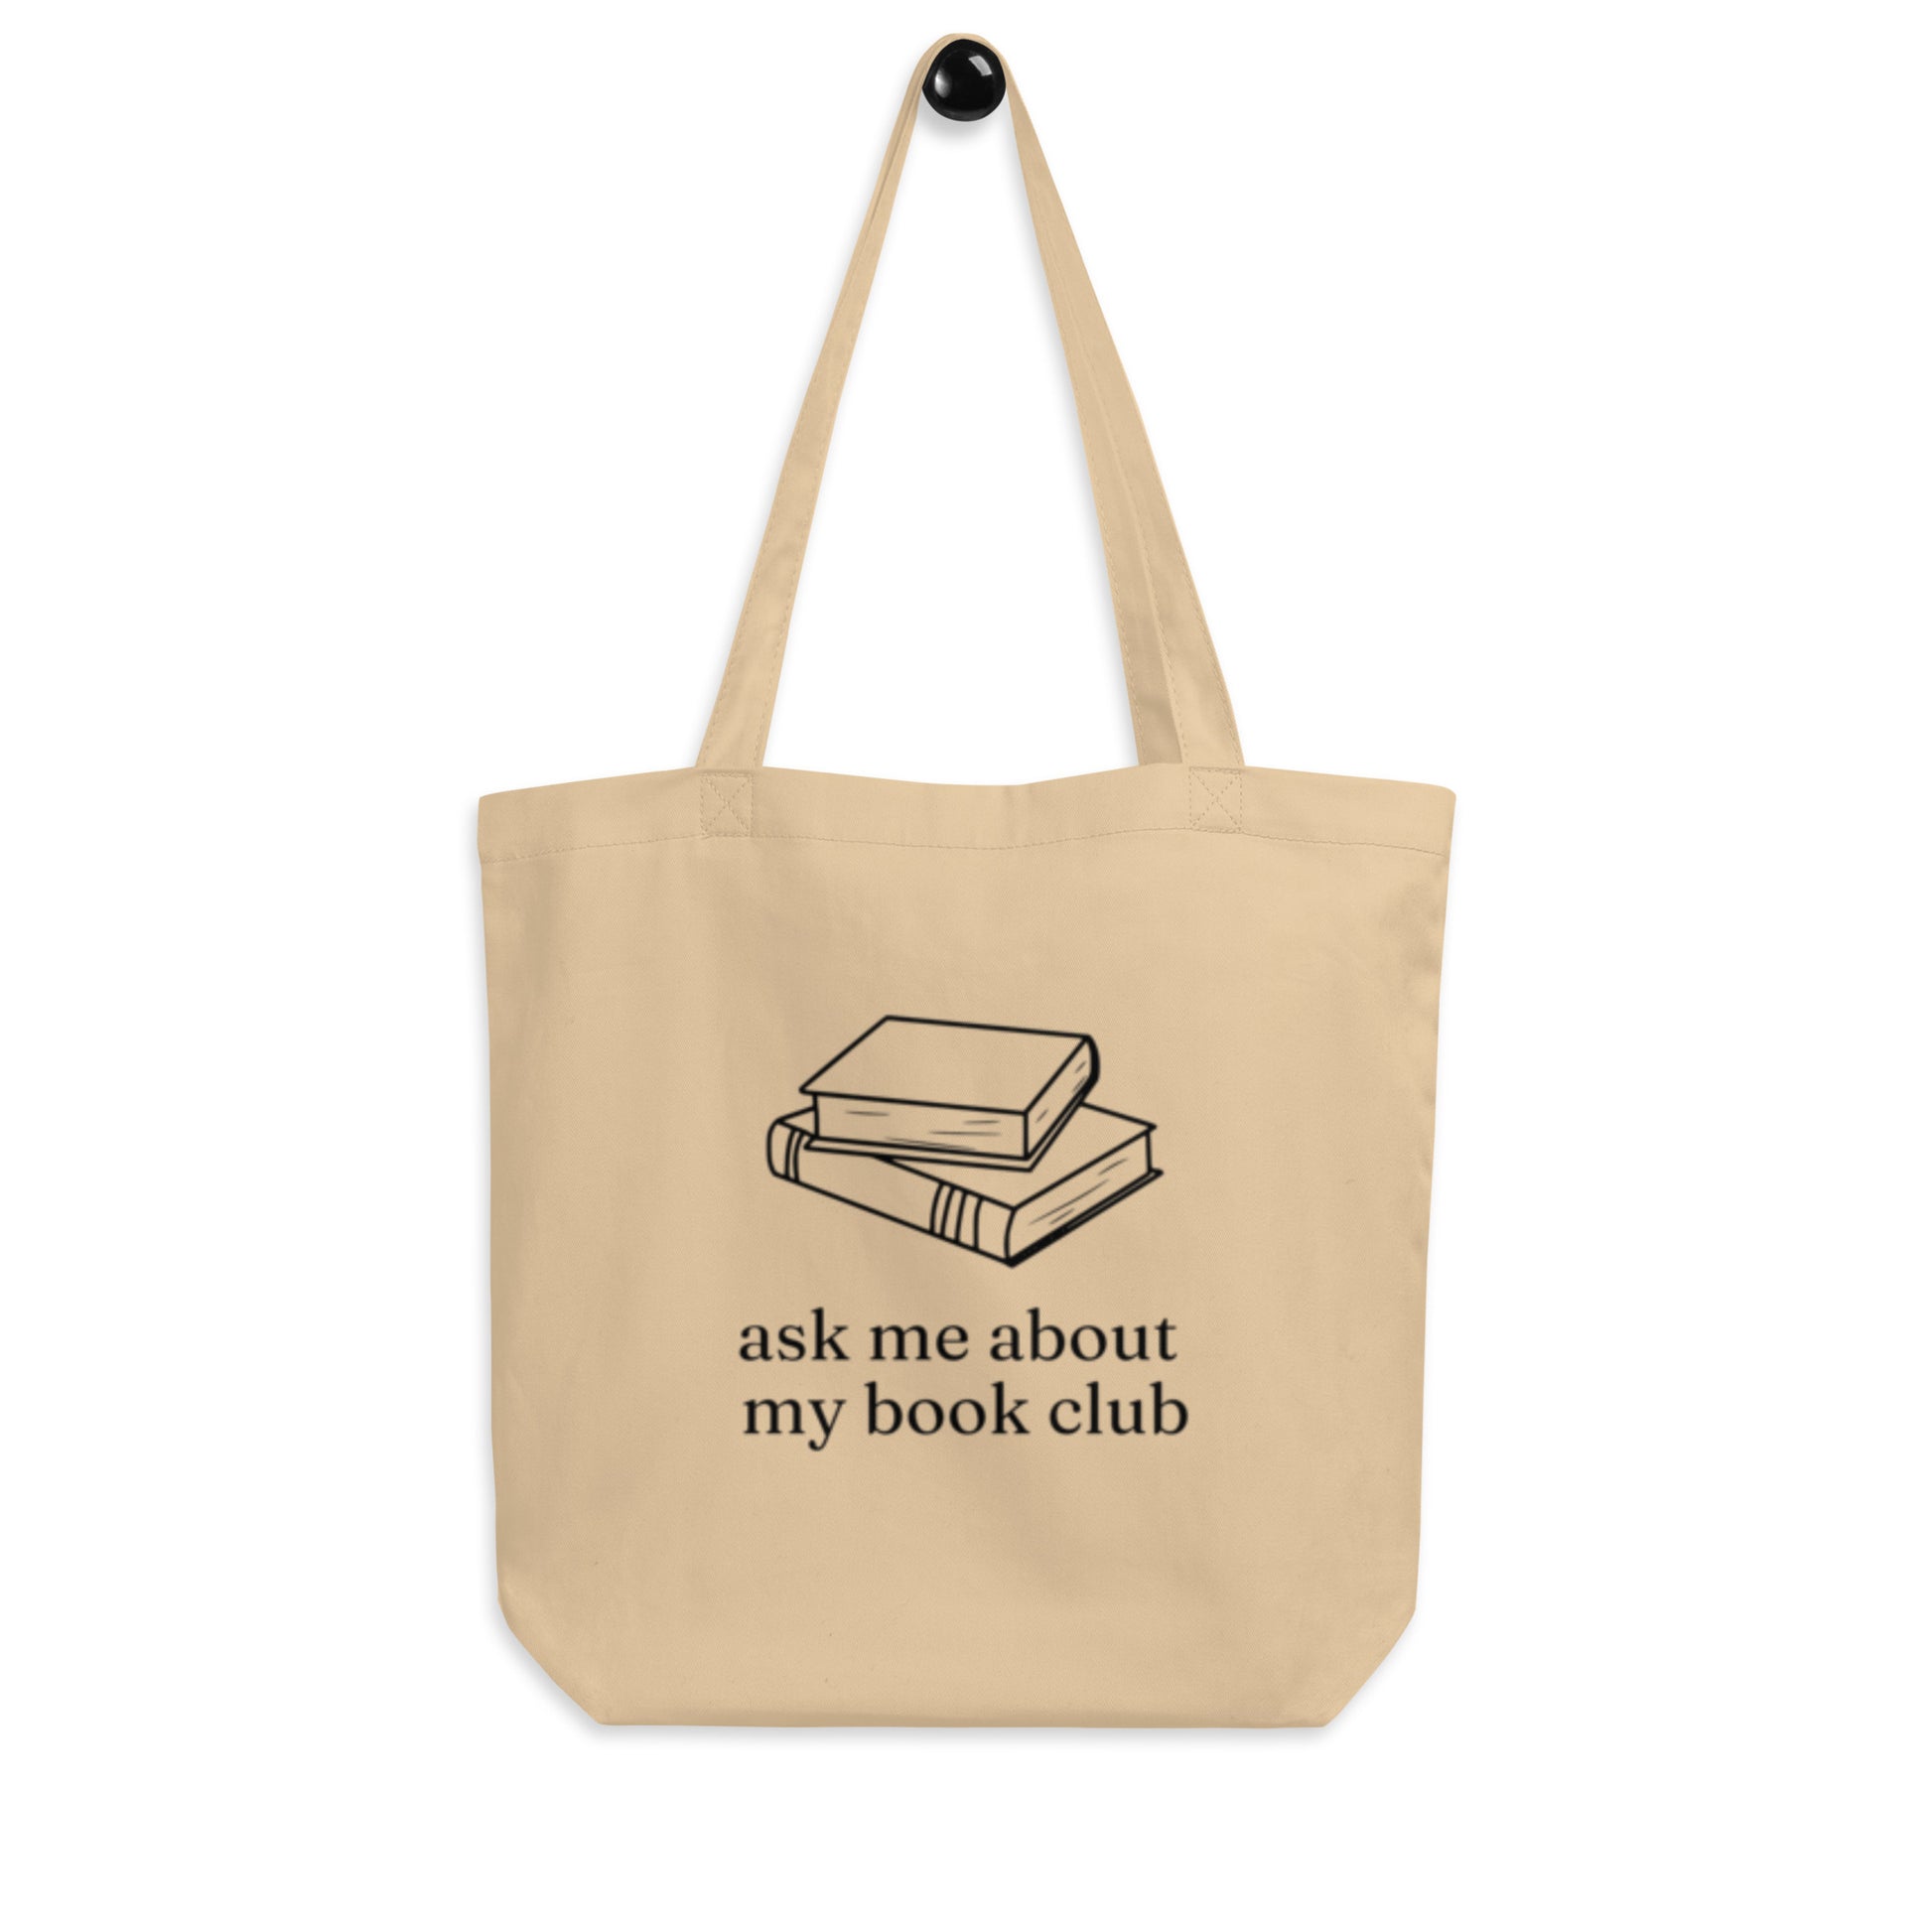 Canvas tote bag with a graphic design that has two books and says "ask me about my book club." Made from 100% eco-friendly cotton.